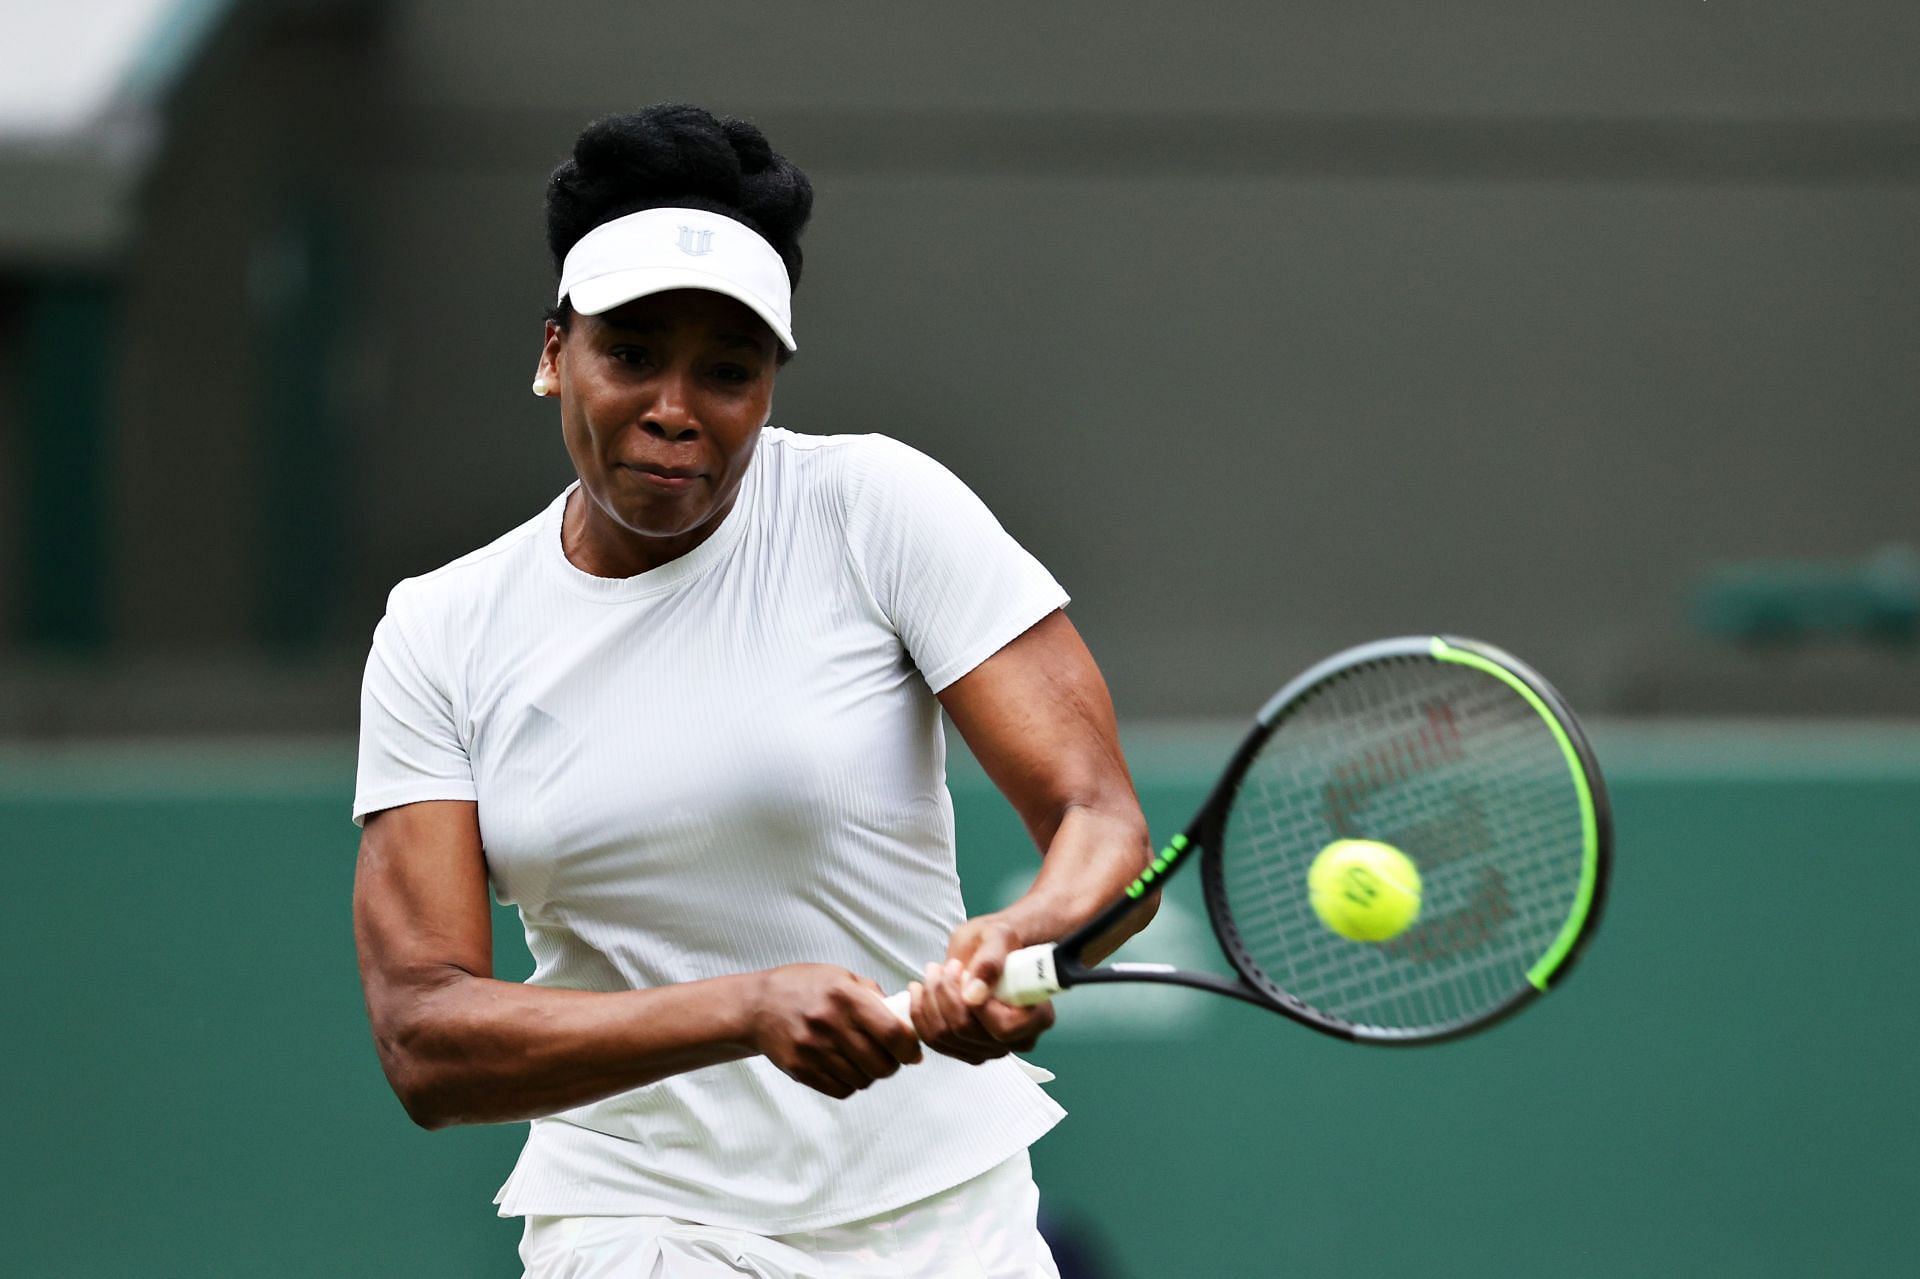 After 27 years of playing tennis, Venus Williams is yet to retire from the support